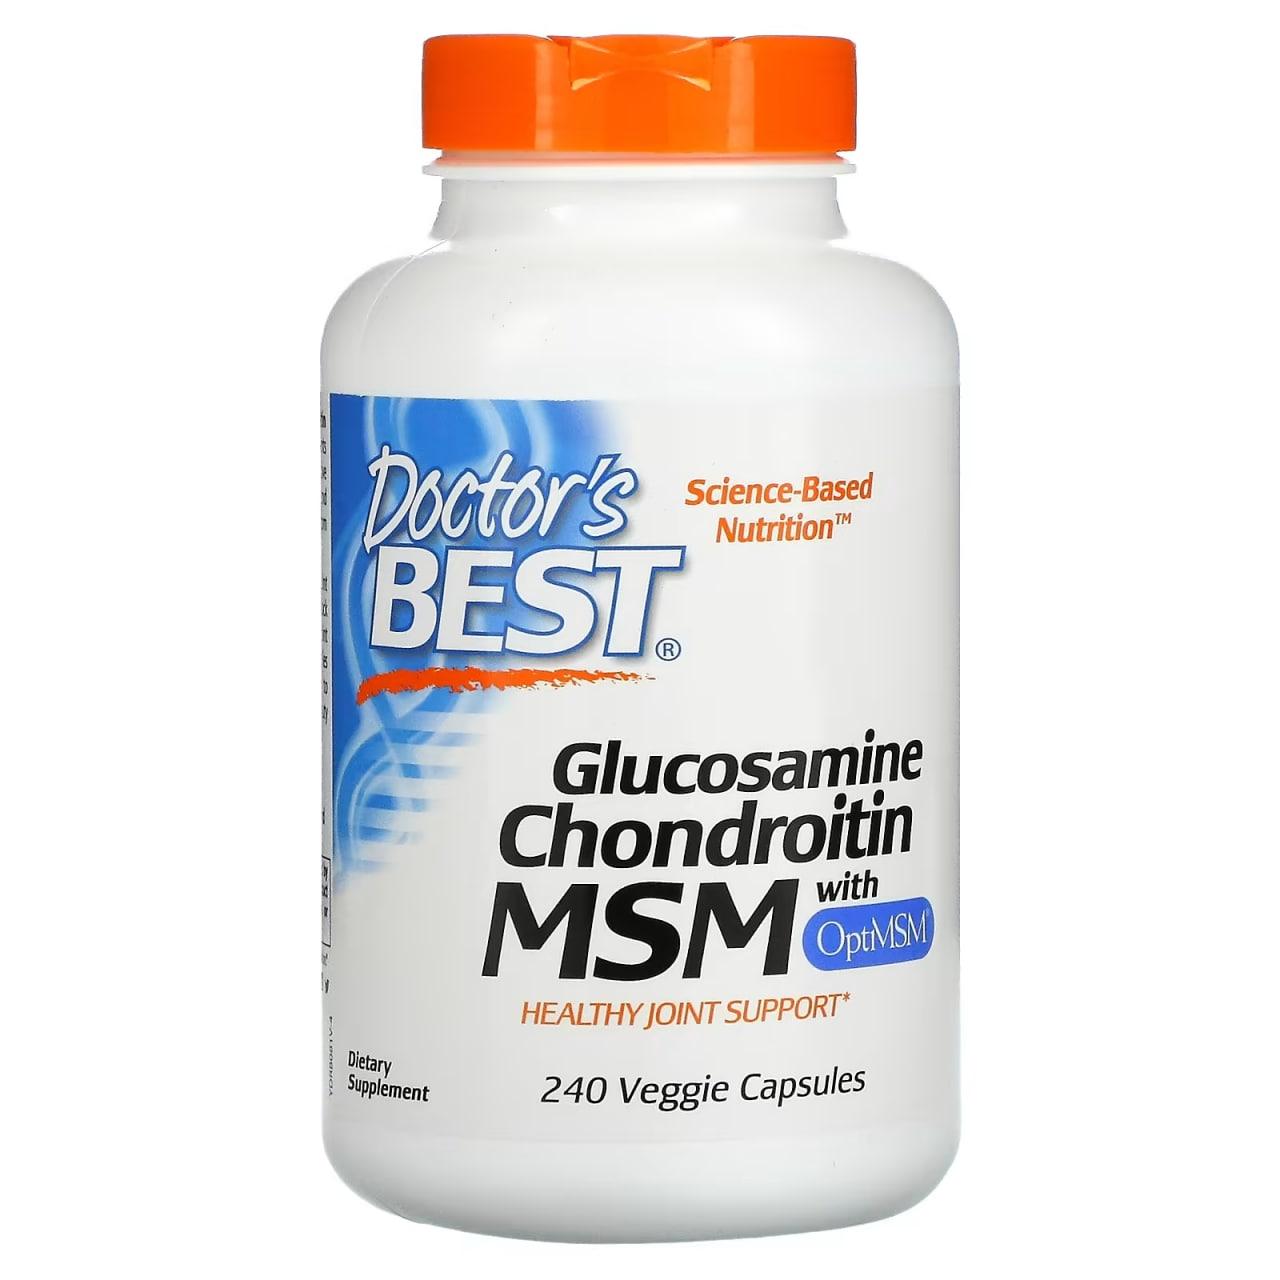 Glucosamine Chondroitin MSM with OptiMSM Doctor's Best 240 Caps,  ml, Doctor's BEST. For joints and ligaments. General Health Ligament and Joint strengthening 